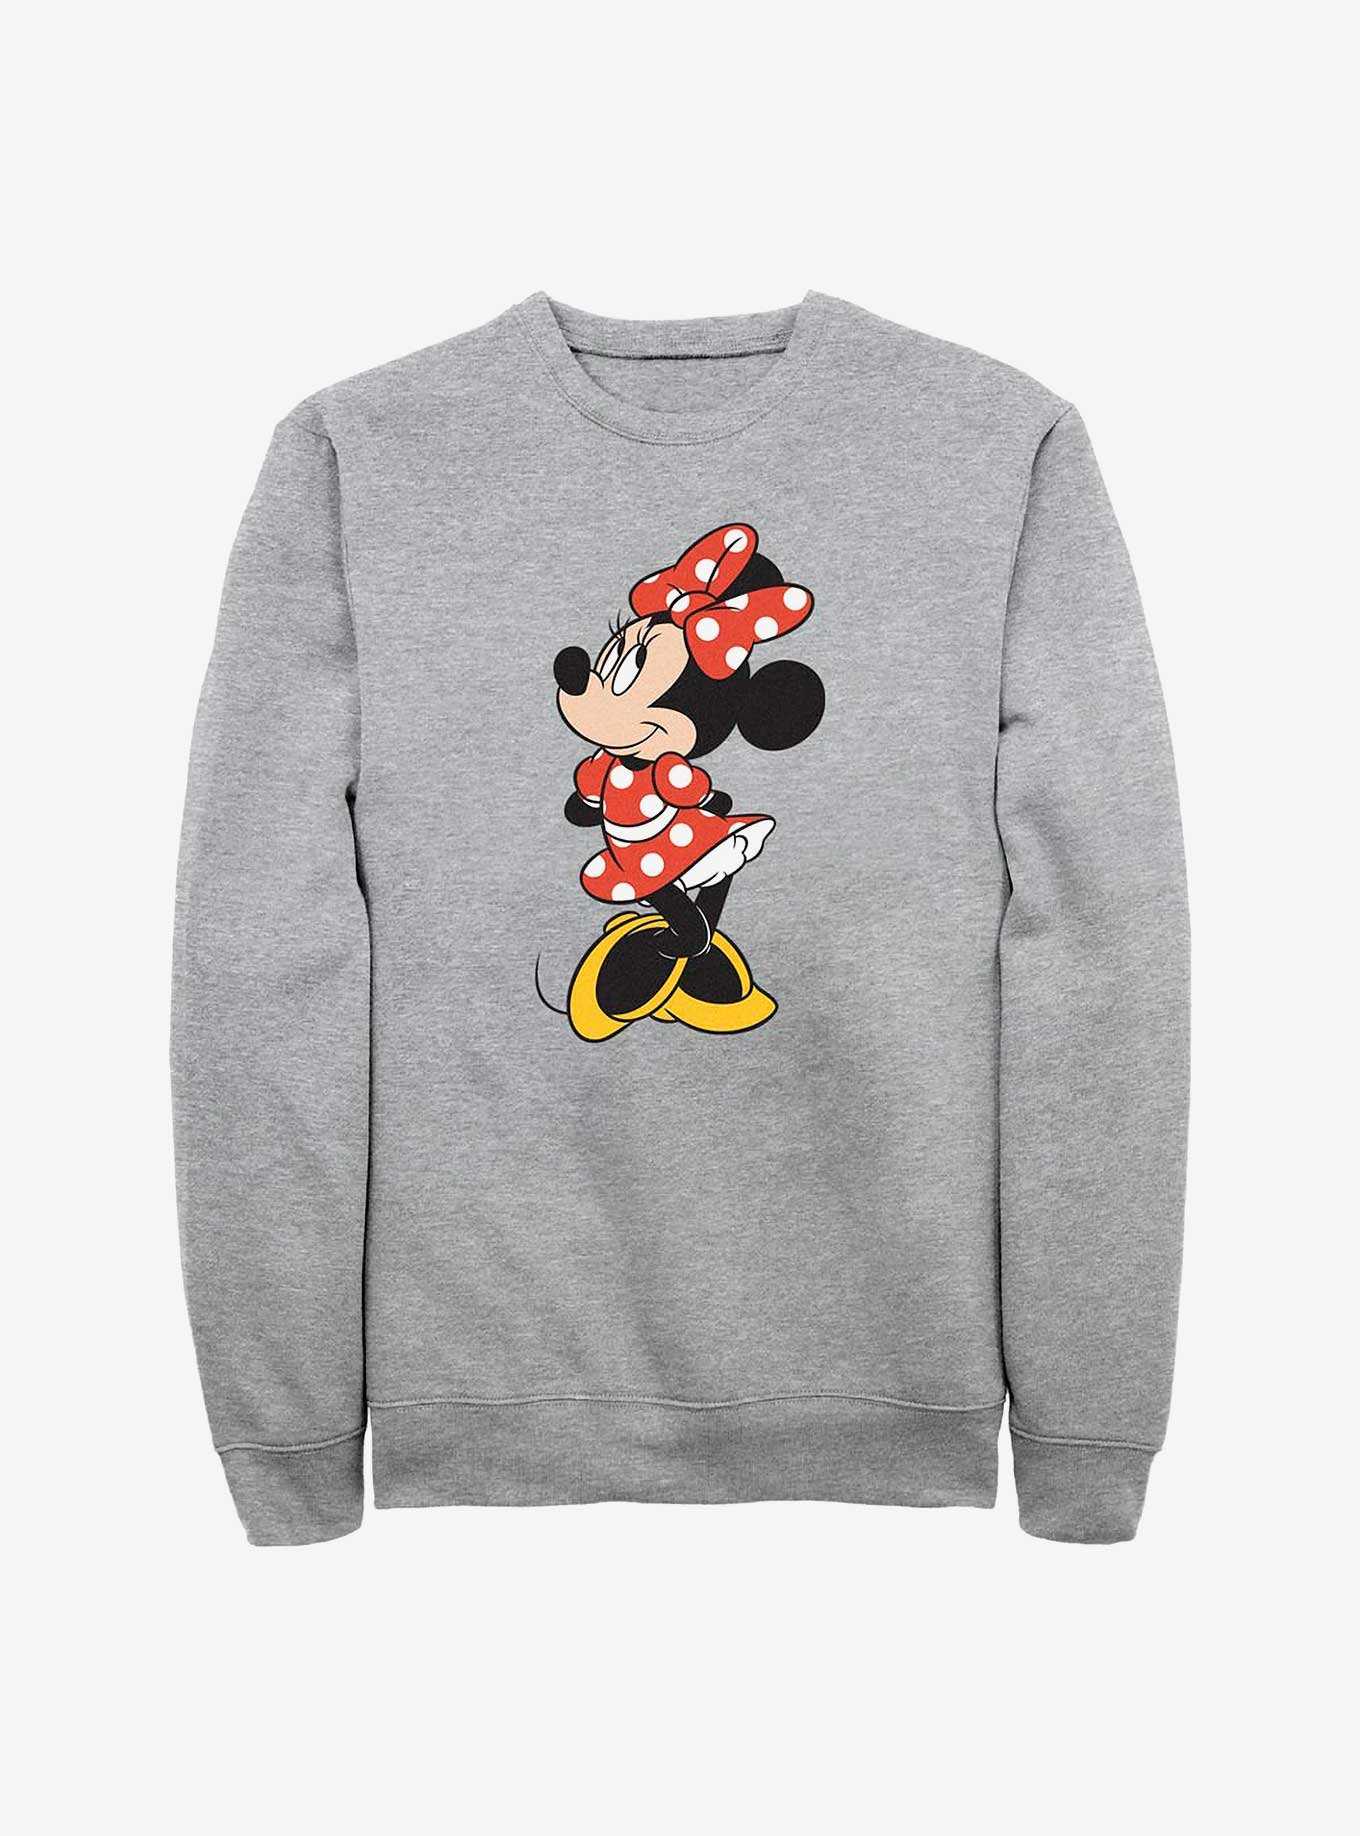 OFFICIAL Minnie Mouse Shirts & Merchandise | Hot Topic